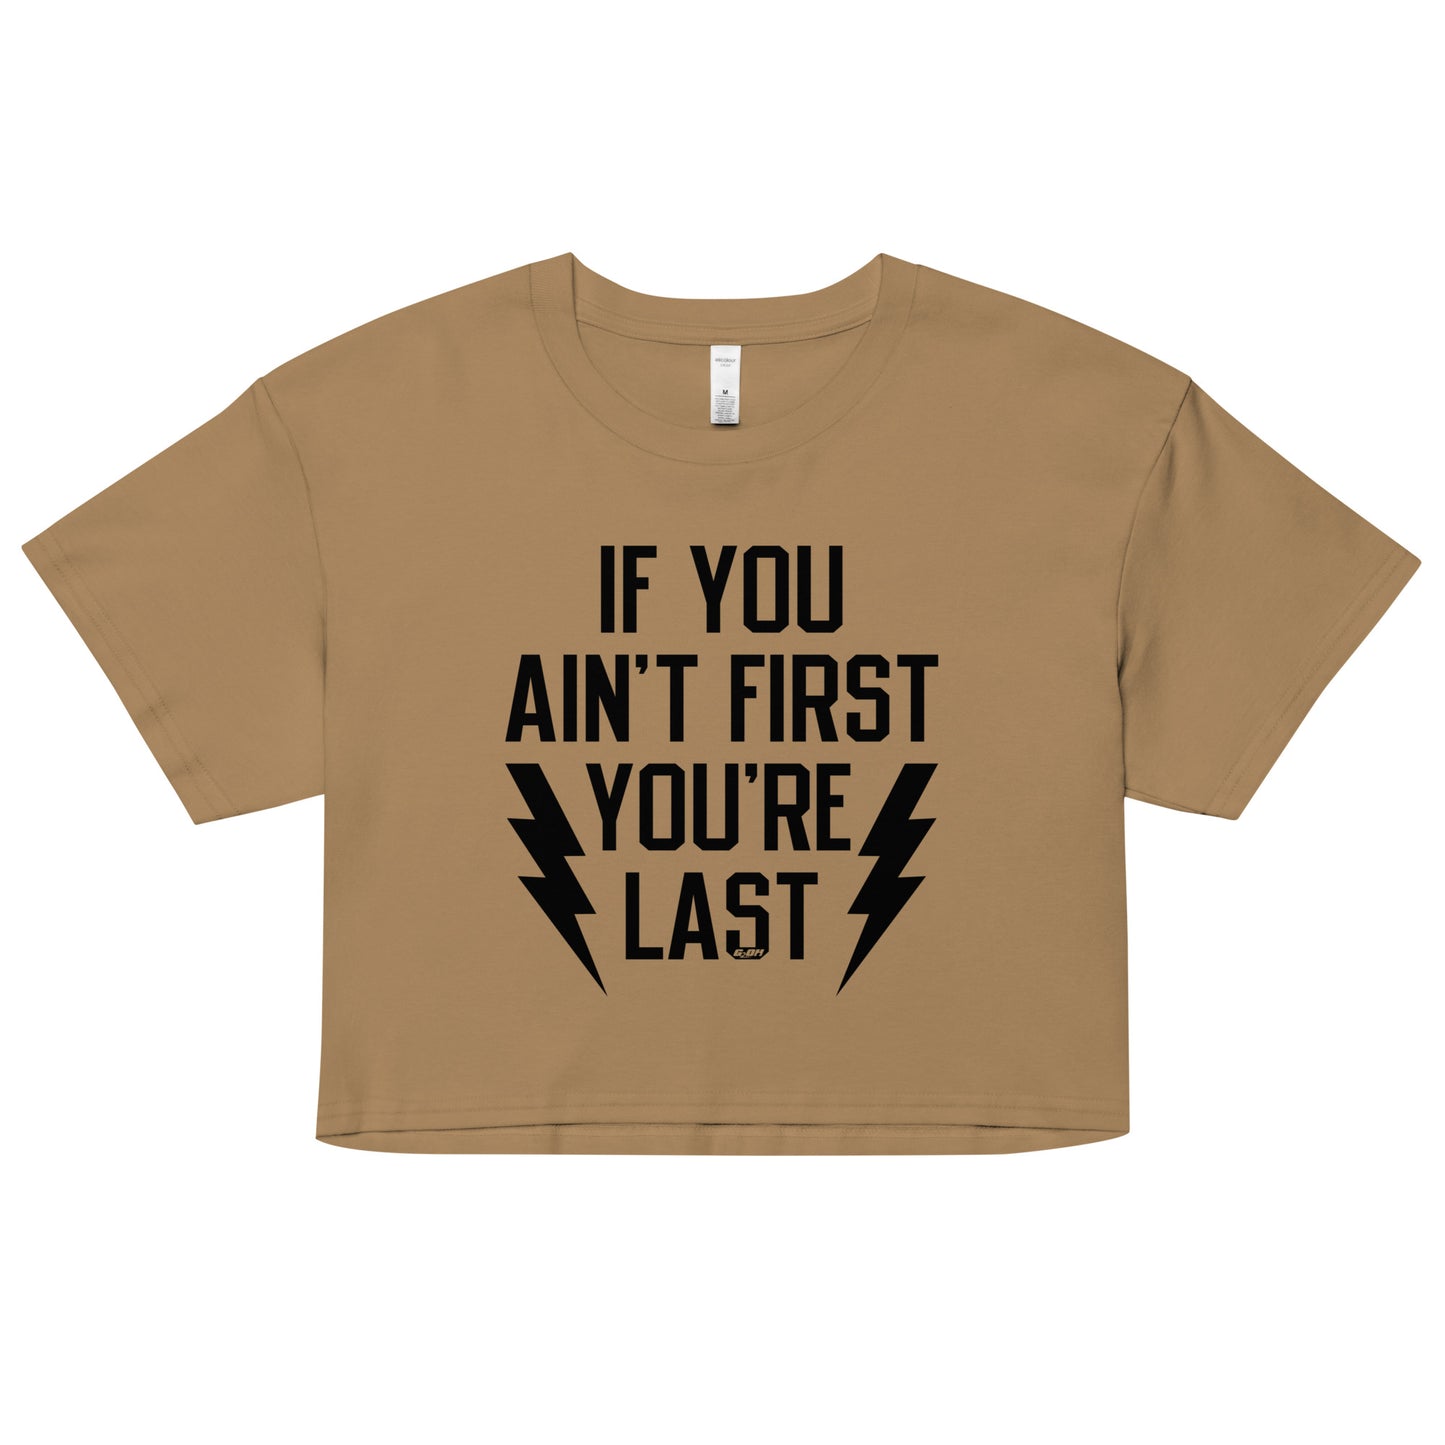 If You Ain't First You're Last Women's Crop Tee